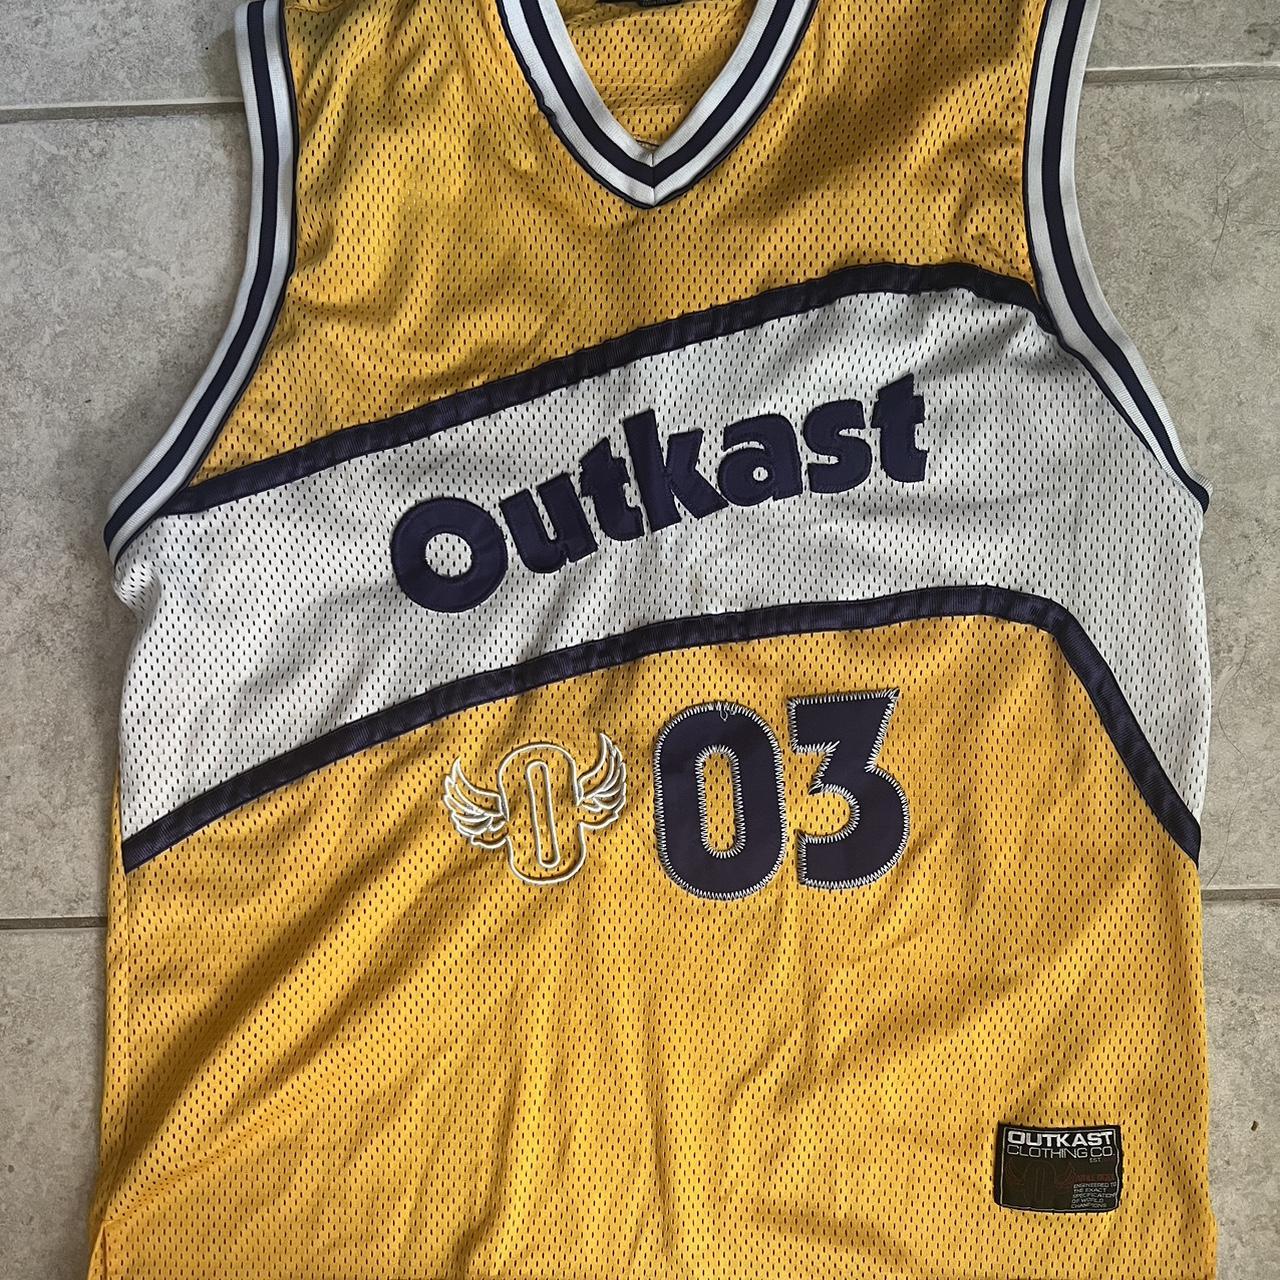 Outkast Jersey Lakers color way XL - Depop